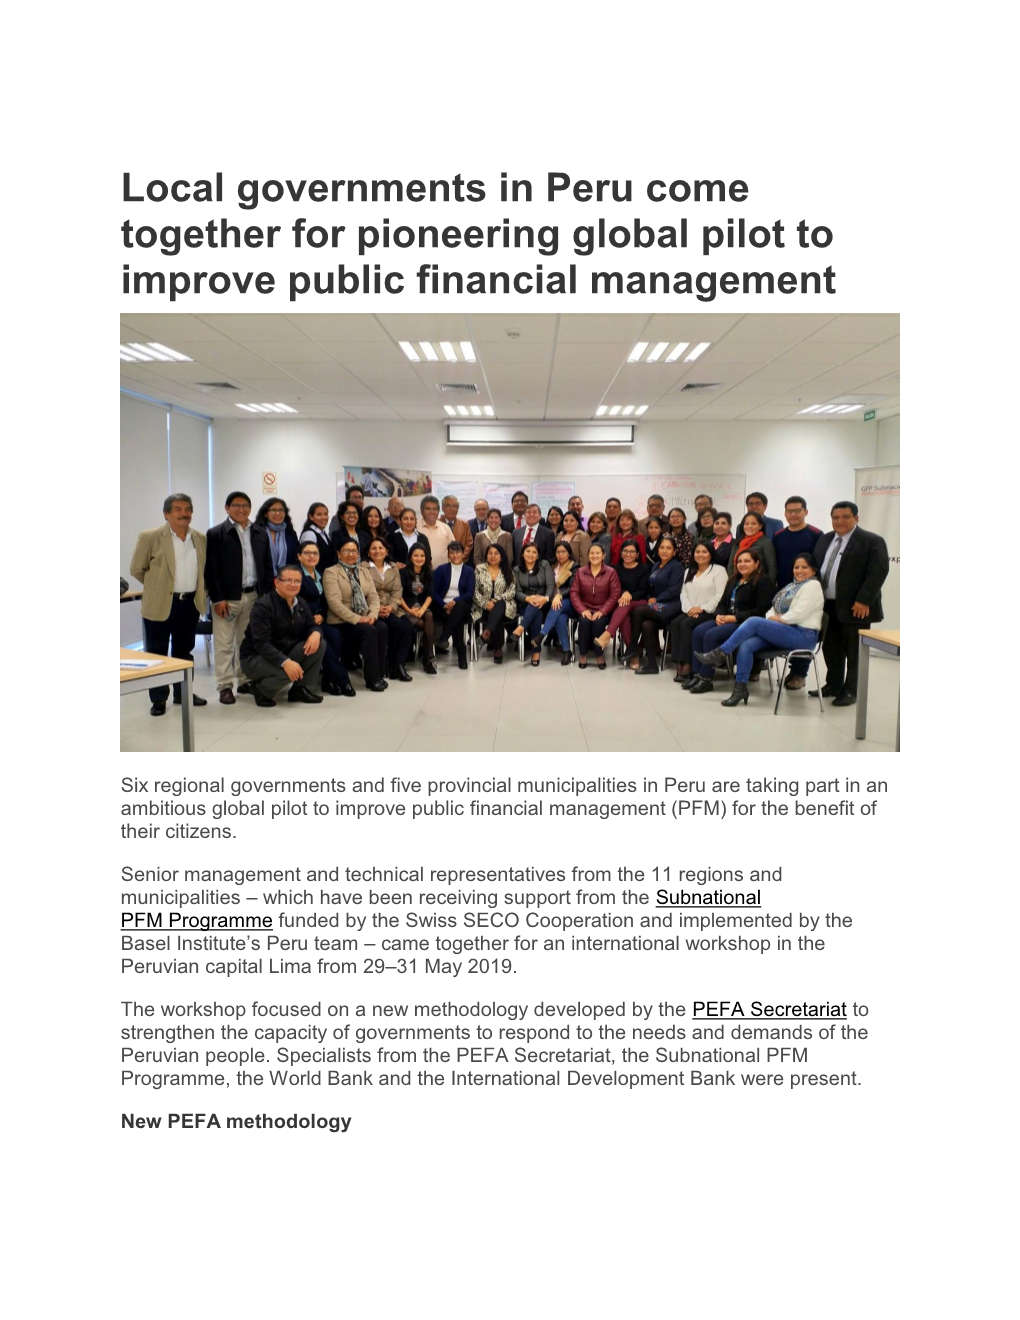 Local Governments in Peru Come Together for Pioneering Global Pilot to Improve Public Financial Management